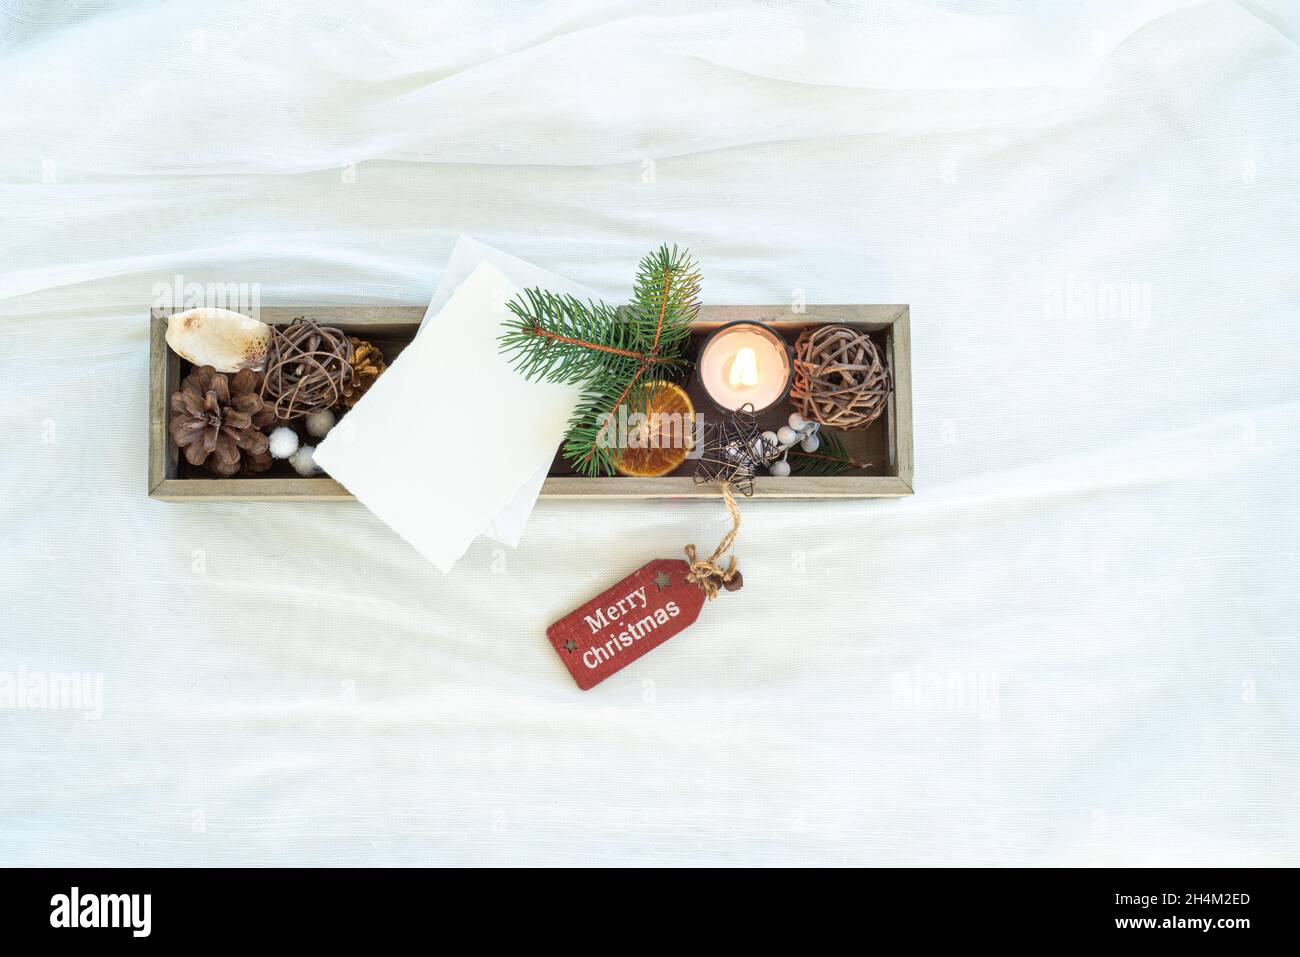 Christmas decorations in small wooden box. Blank greeting card mockup among fir twig, candle, dried citrus slice, pine cone, and ornamental balls Stock Photo